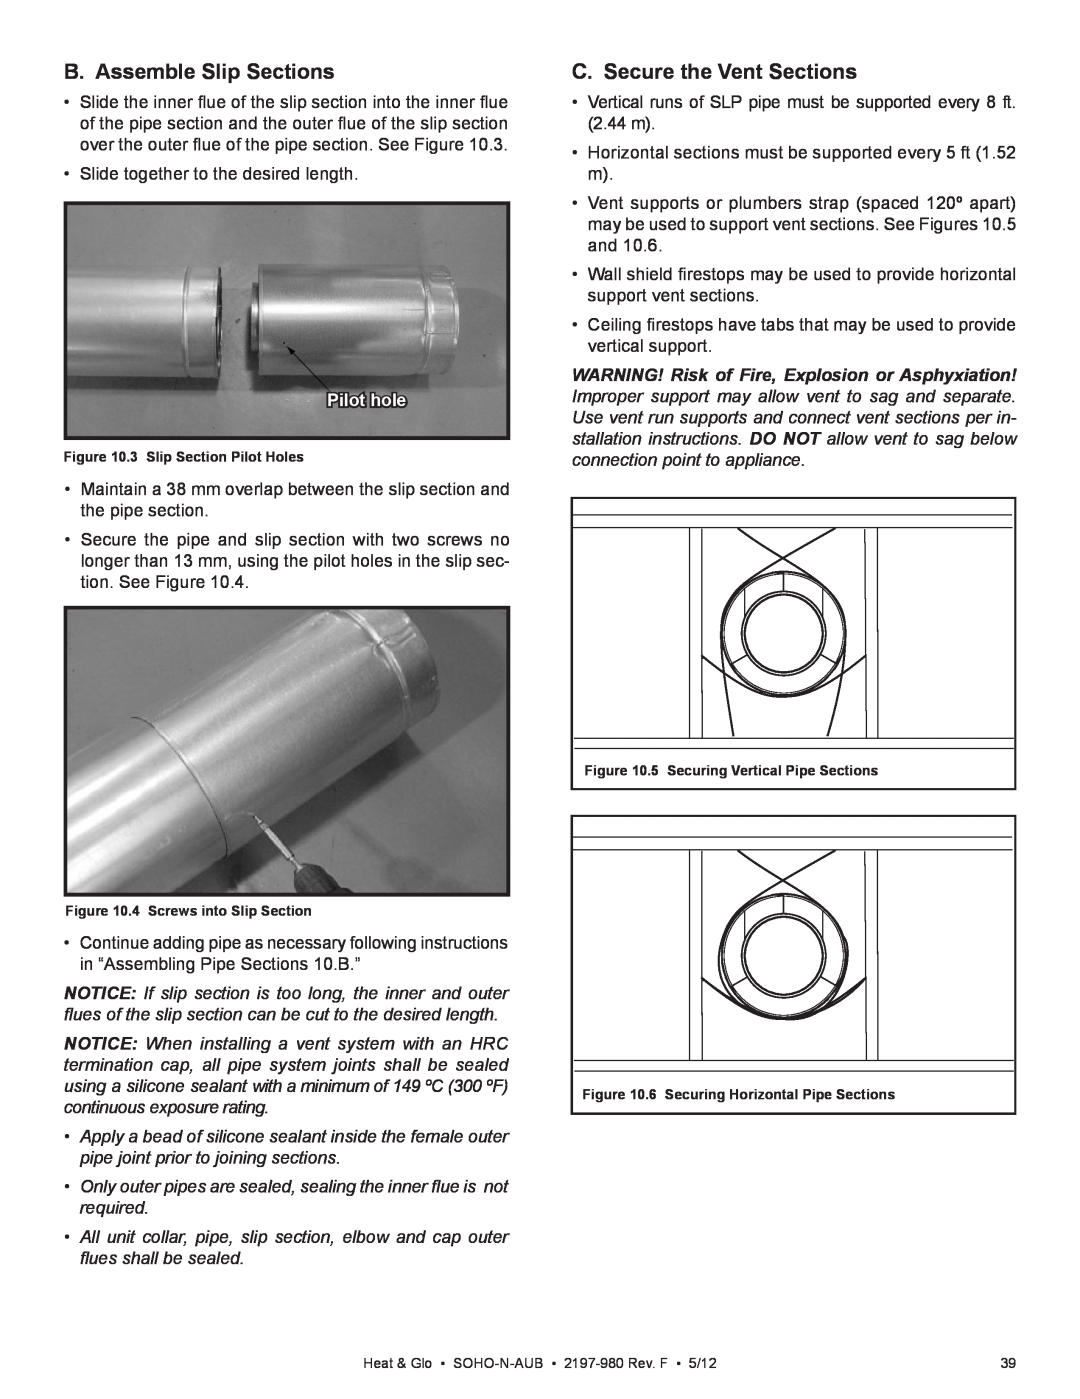 Heat & Glo LifeStyle 2197-980 owner manual B. Assemble Slip Sections, C. Secure the Vent Sections, Pilot hole 